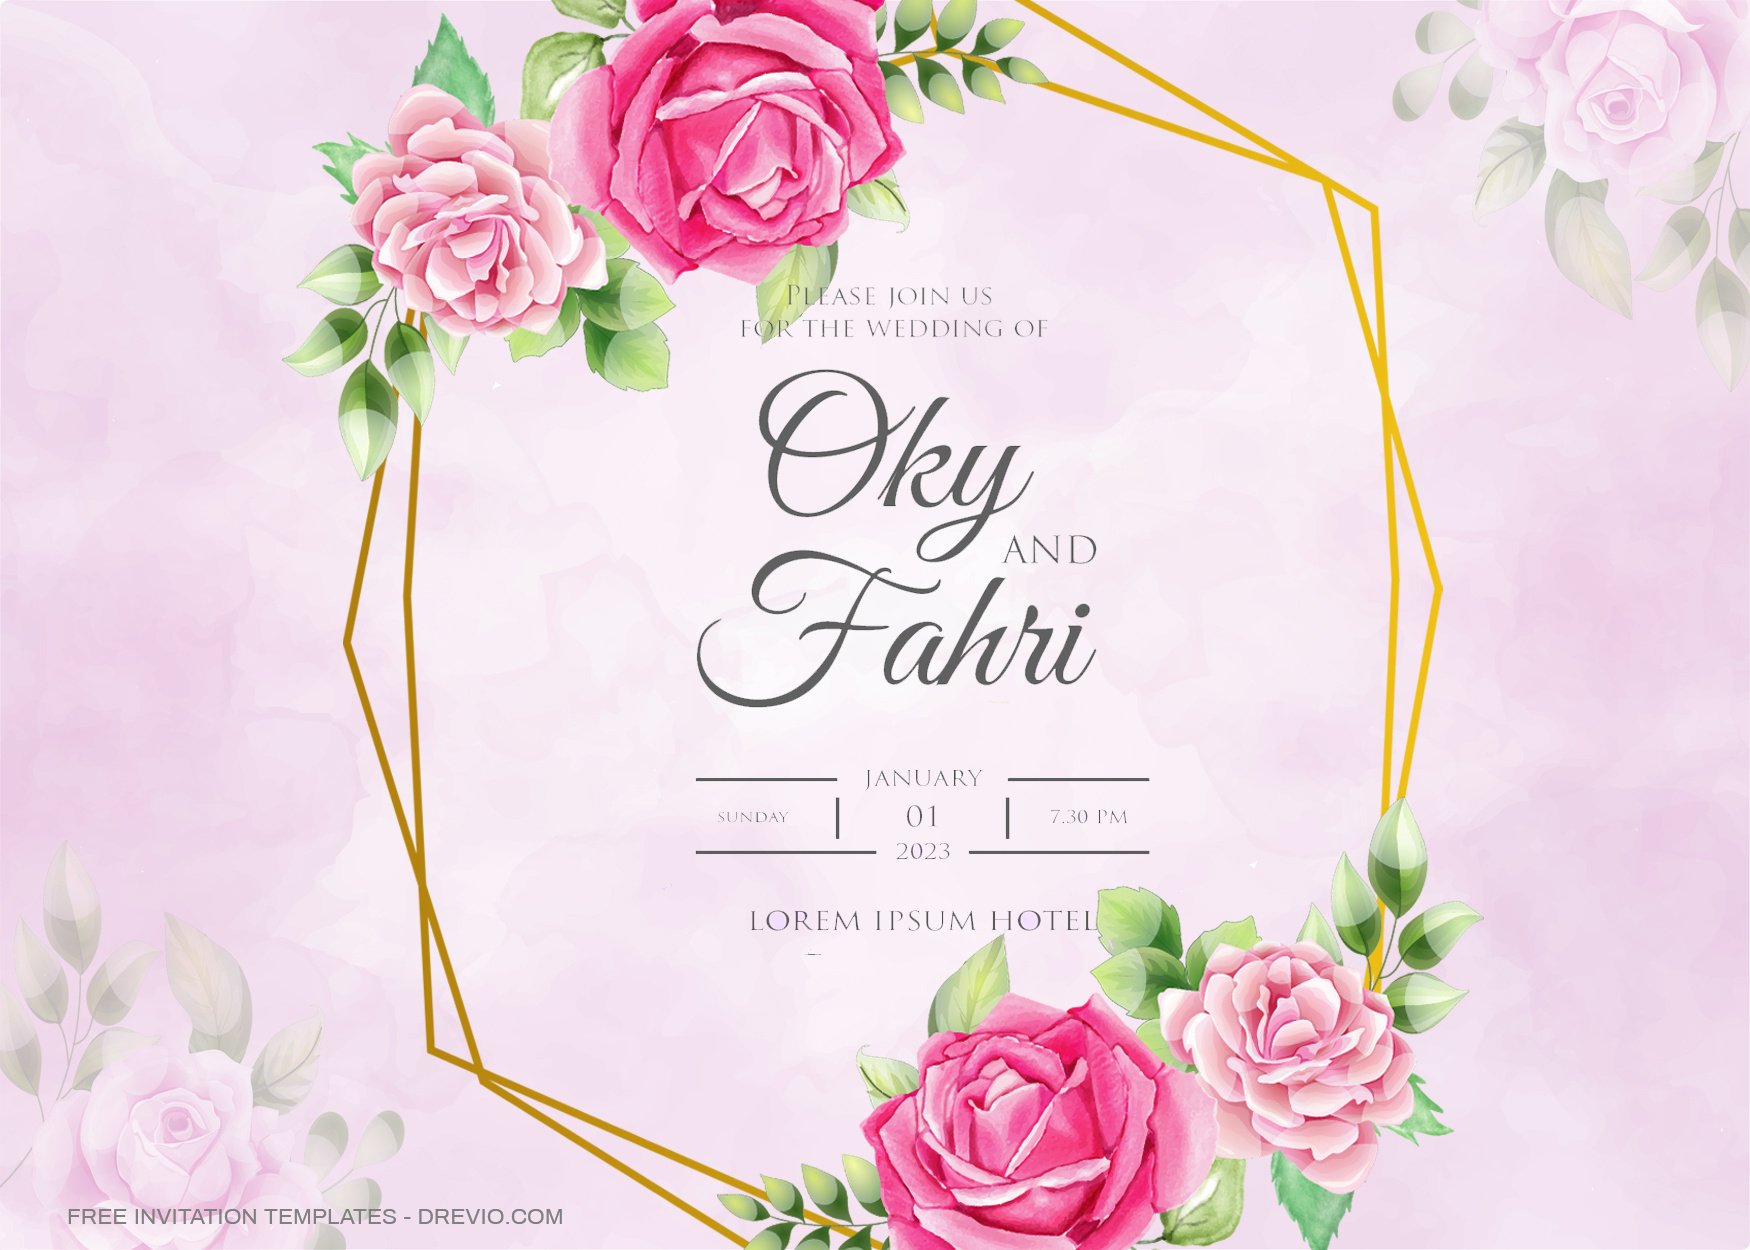 7+ Romance Pink Roses Floral Invitation Template